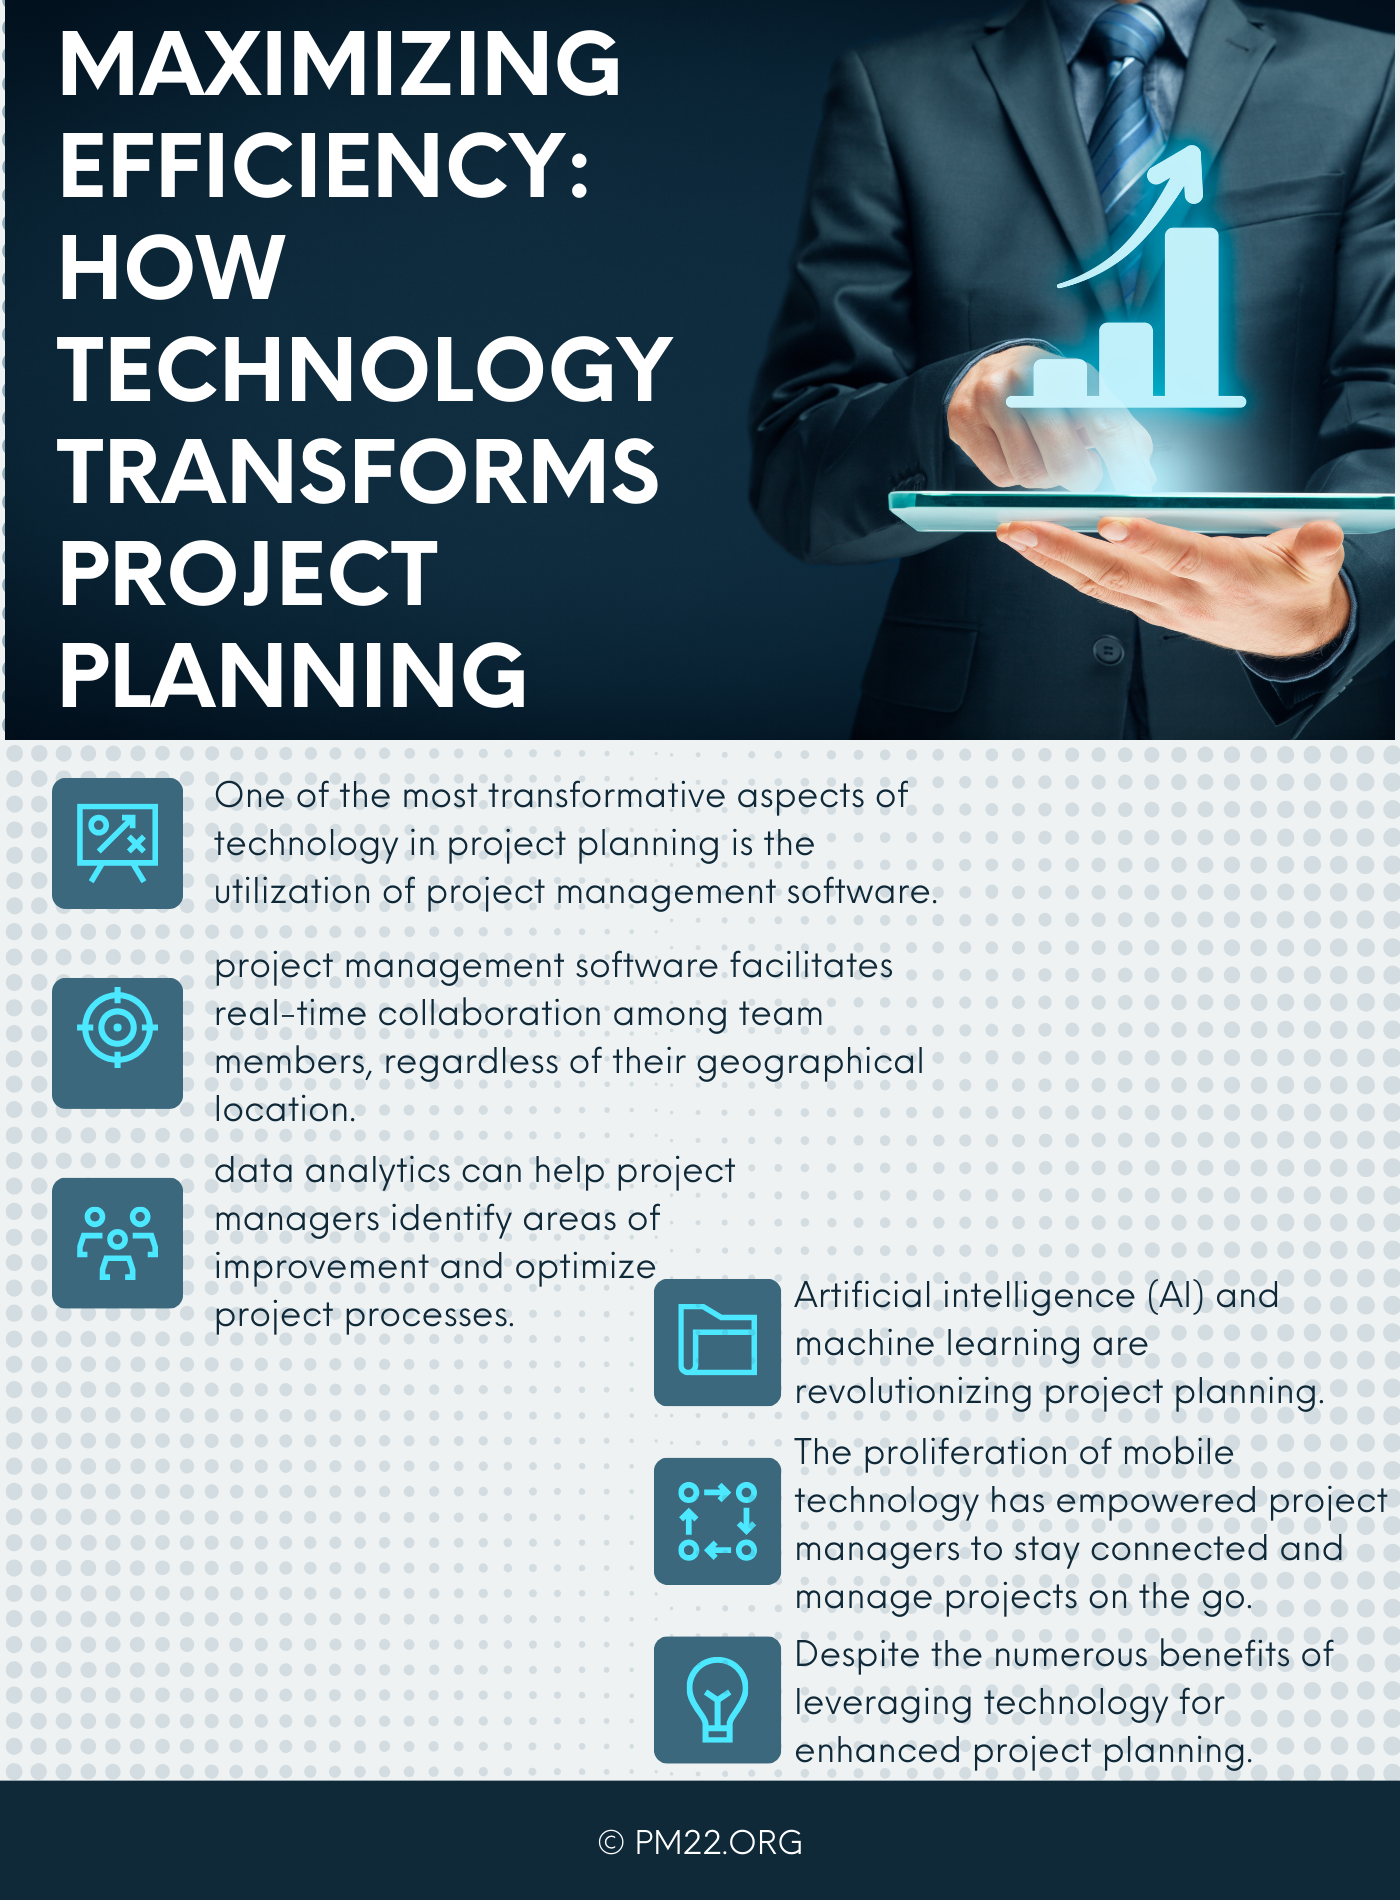 Maximizing Efficiency: How Technology Transforms Project Planning